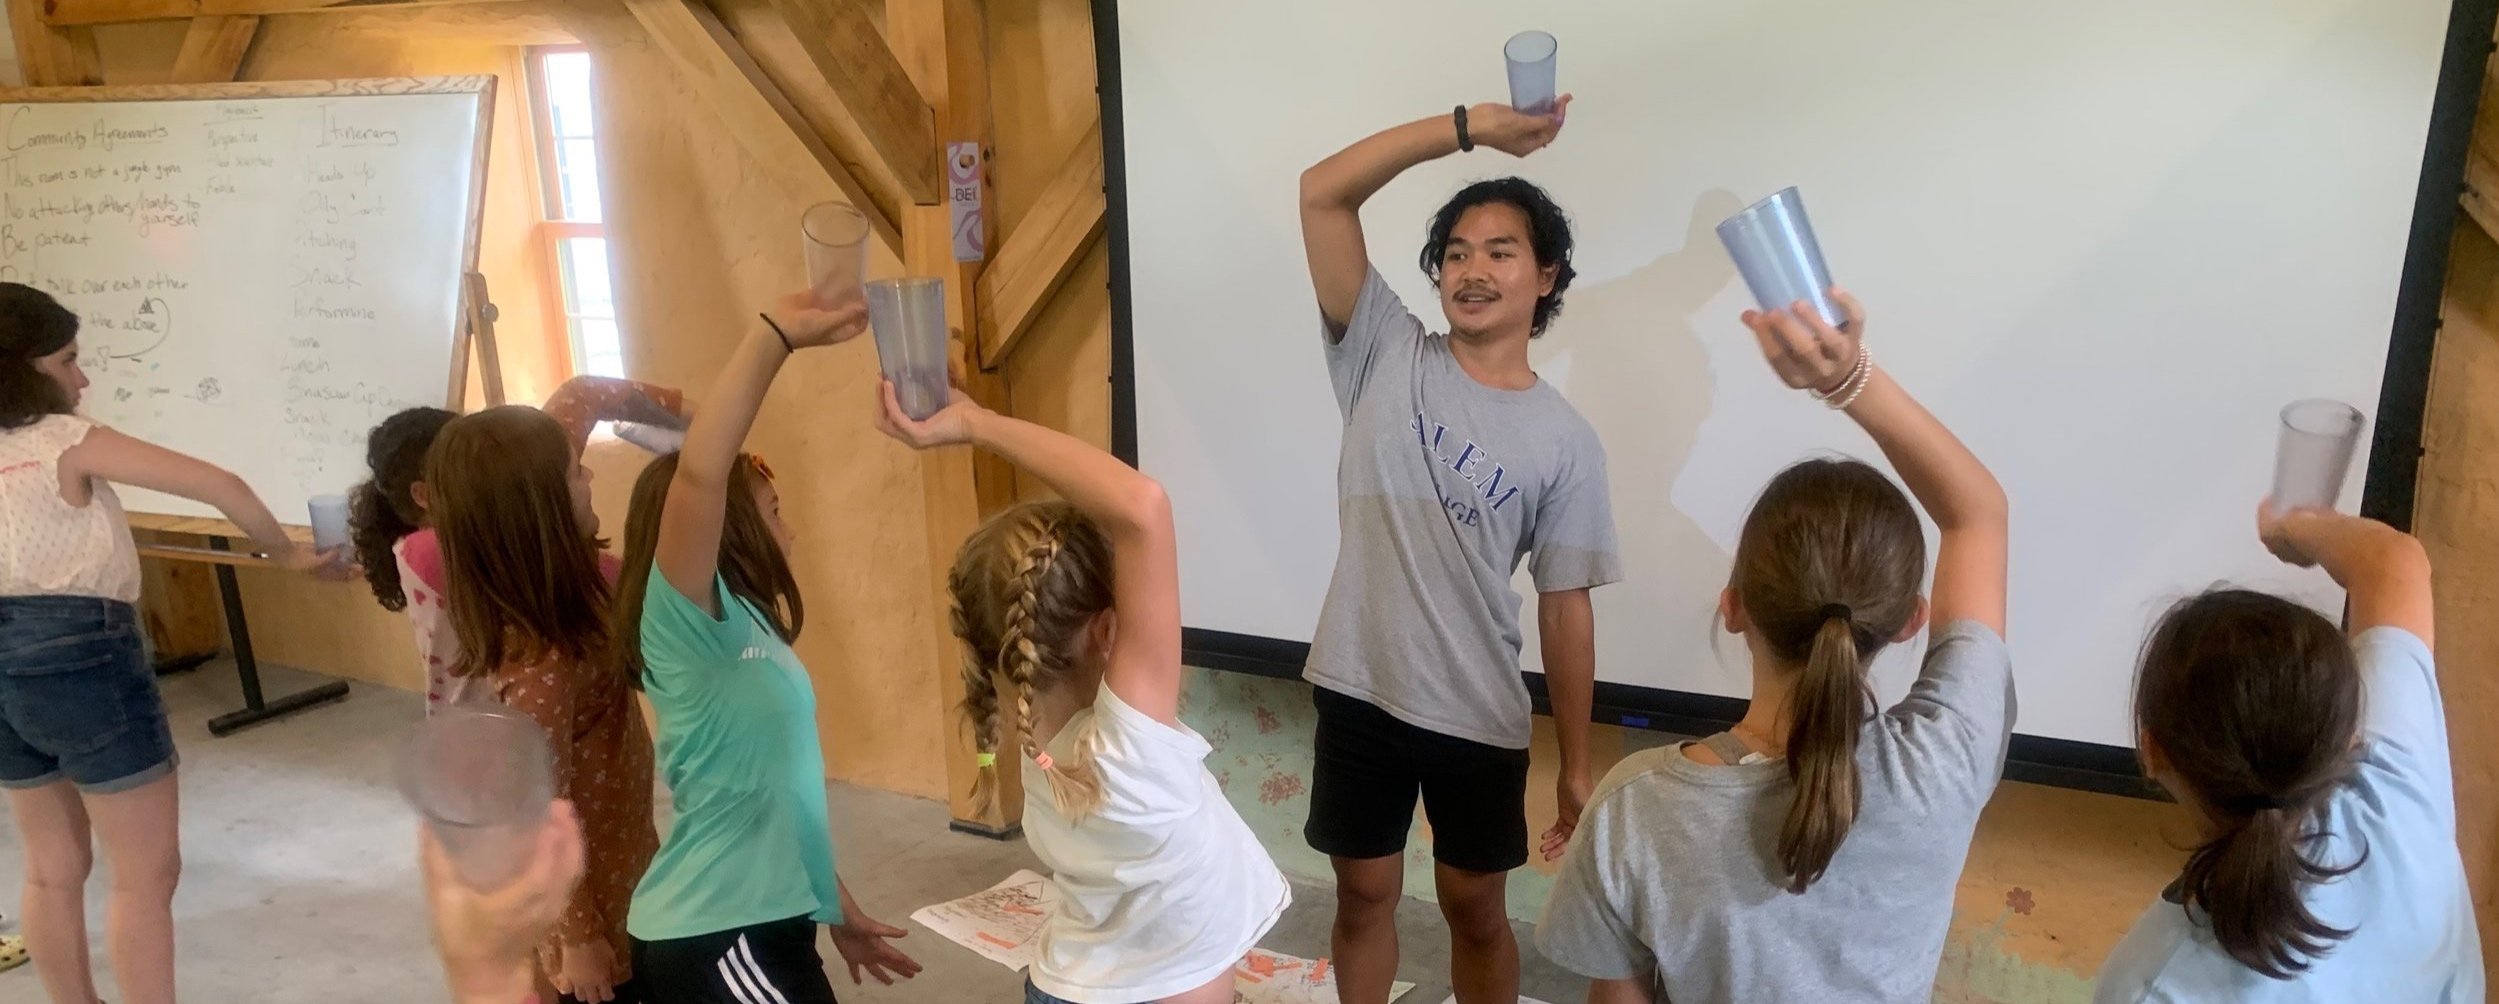 Camp Halfblood - Summer Drama Class - Ages 8-12